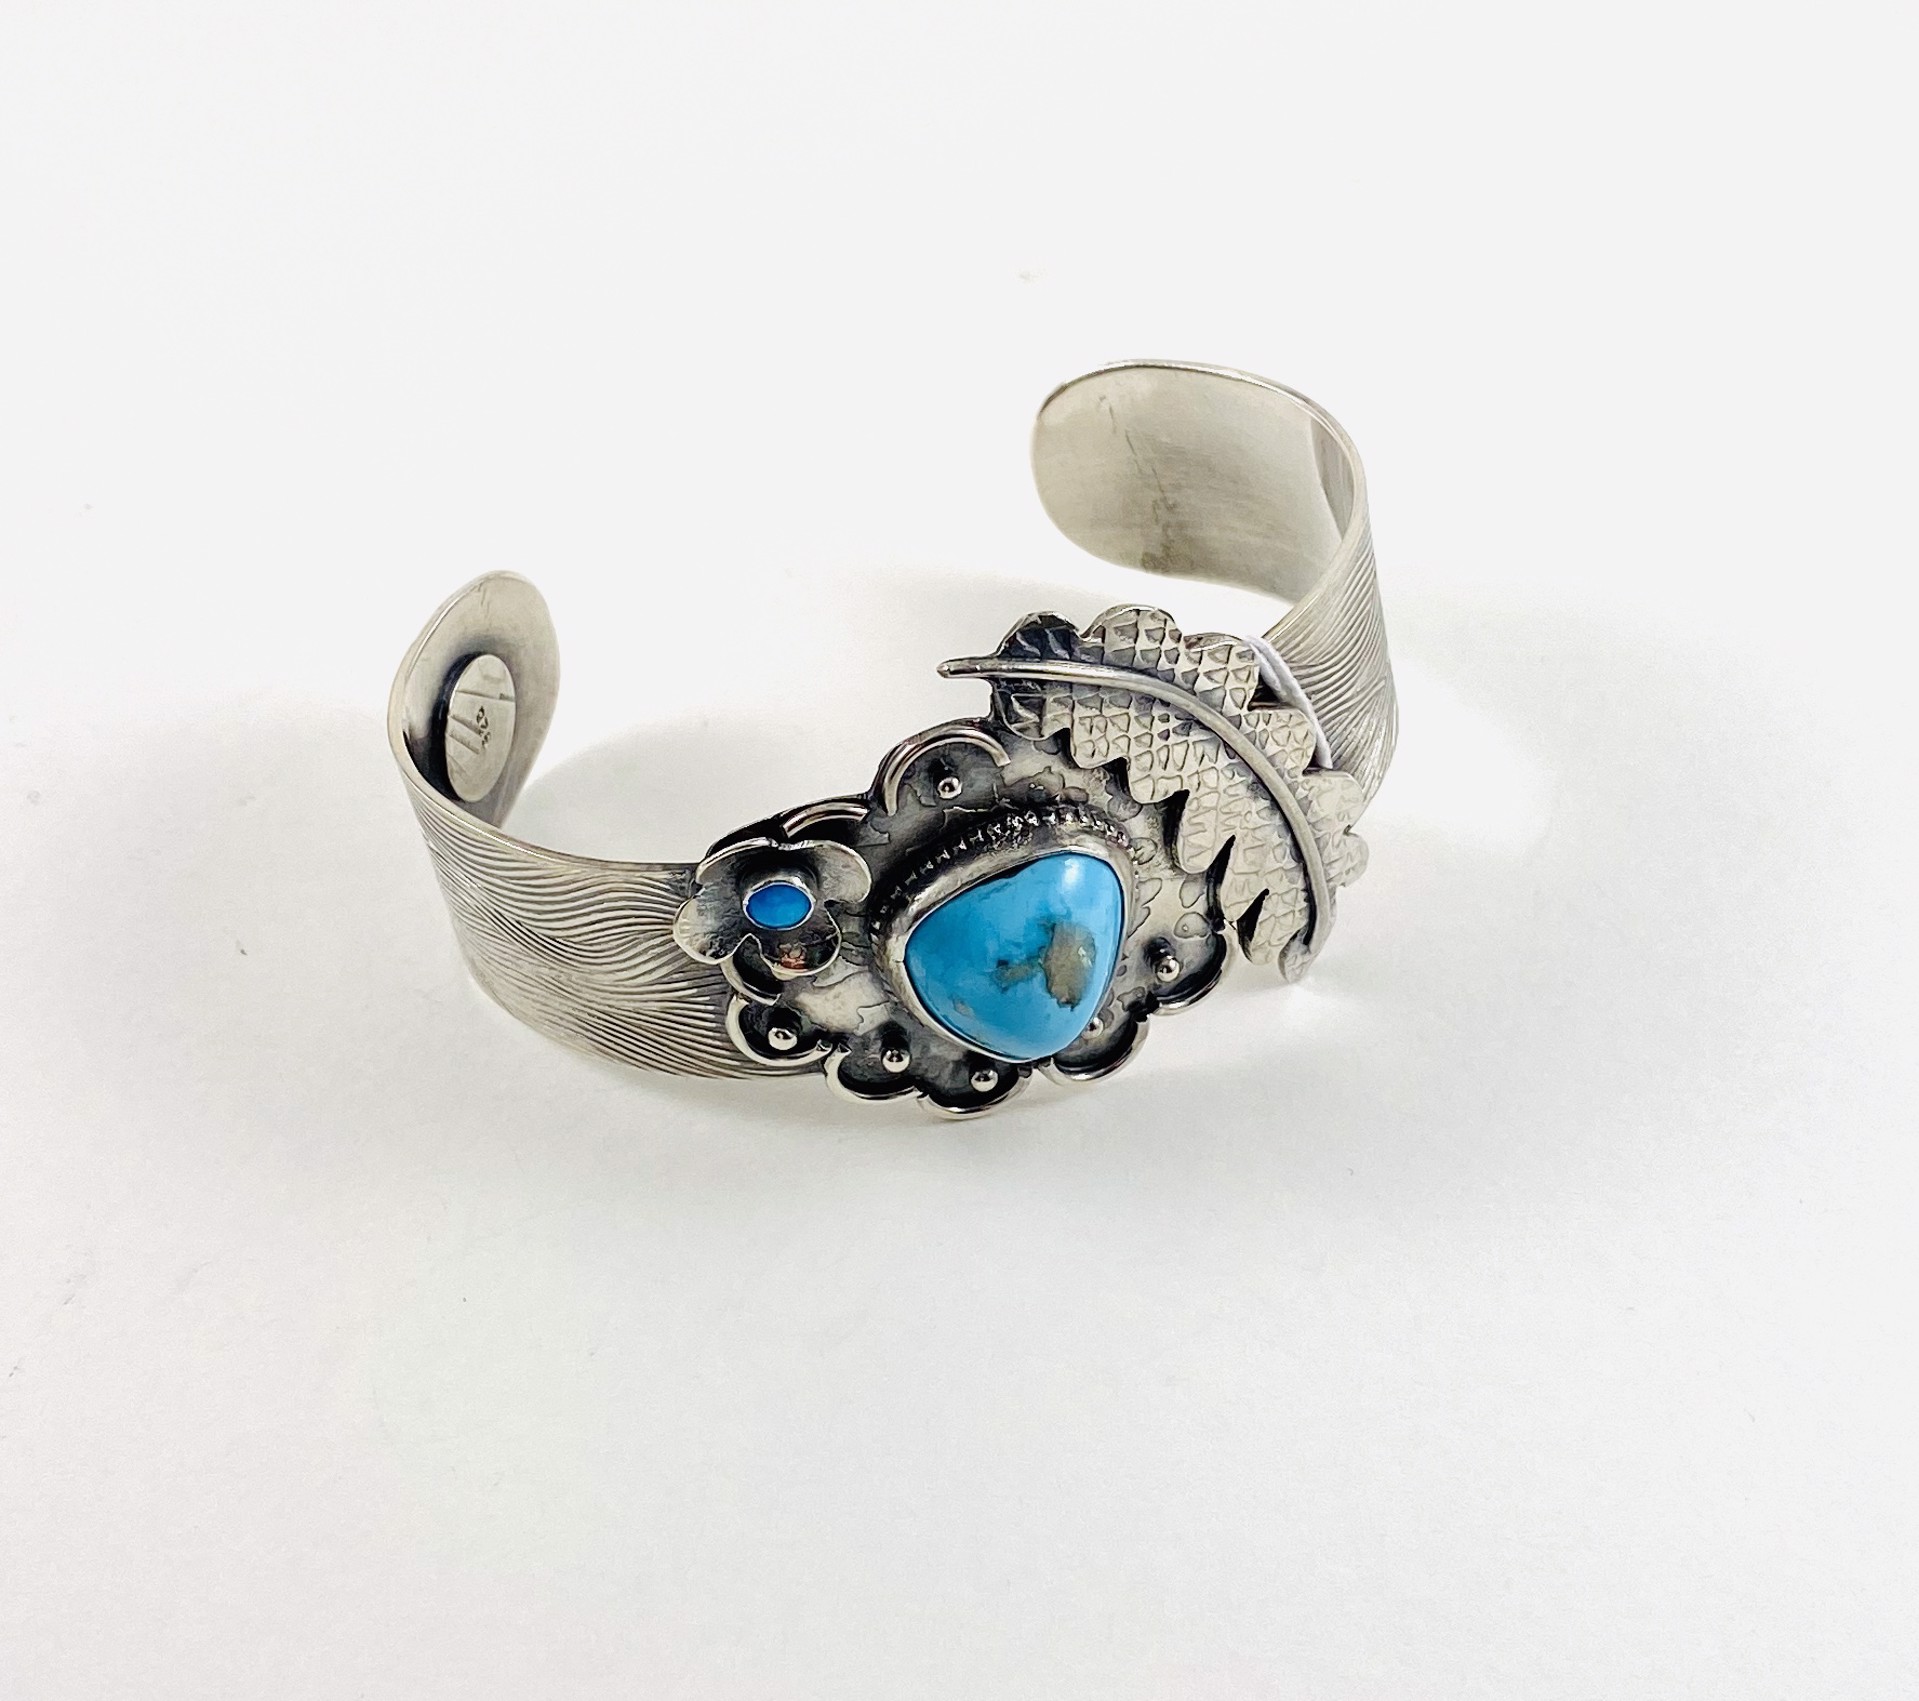 American South Western Turquoise and Silver Cuff, #227 by Anne Bivens